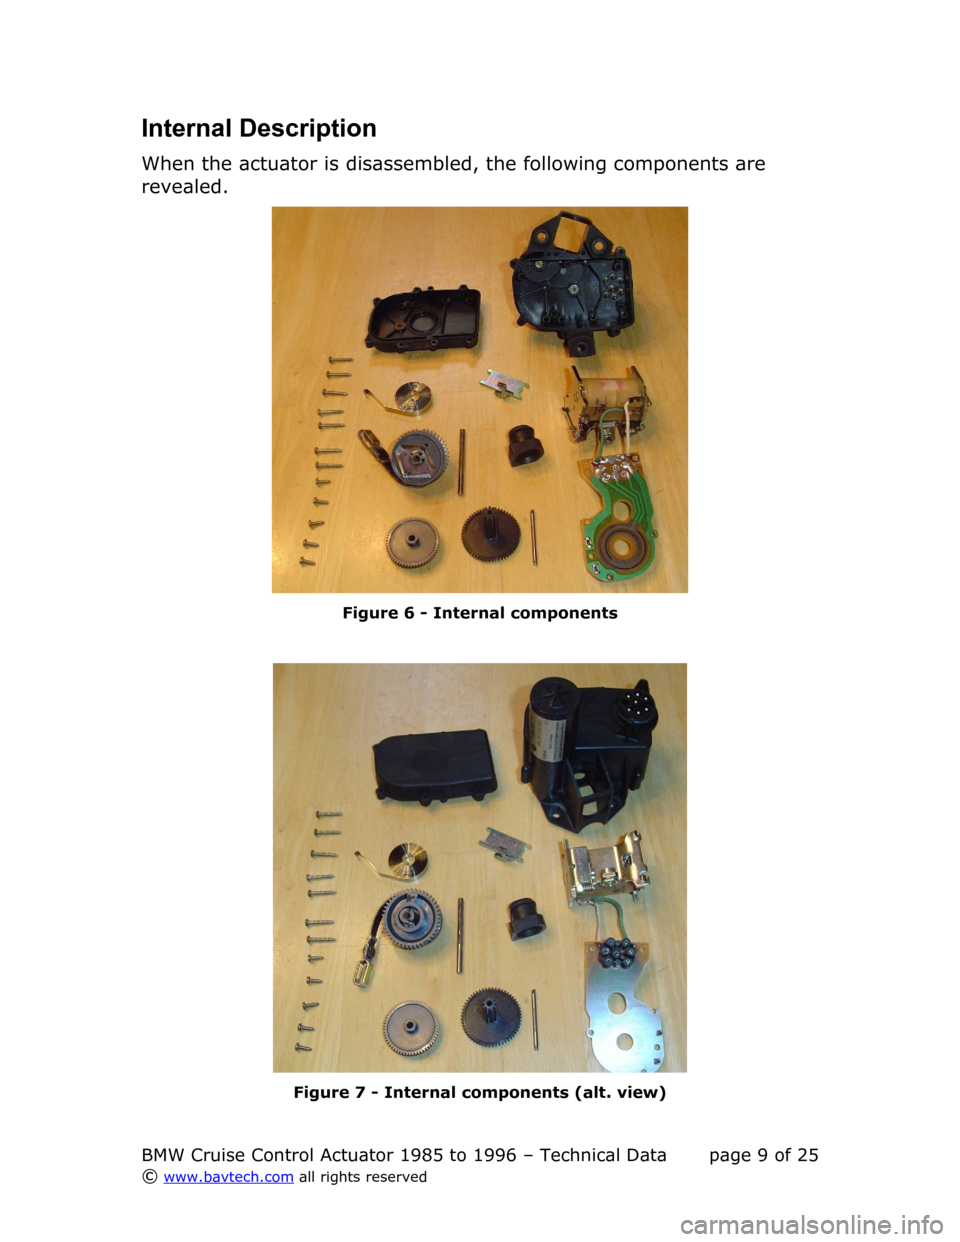 BMW 7 SERIES 1992 E32 Cruise Control Acutator Internal Description
When the actuator is disassembled, the following components are  
revealed.
Figure  6  - Internal components
Figure  7  - Internal components (alt. view)
BMW Cruise Control Actuat